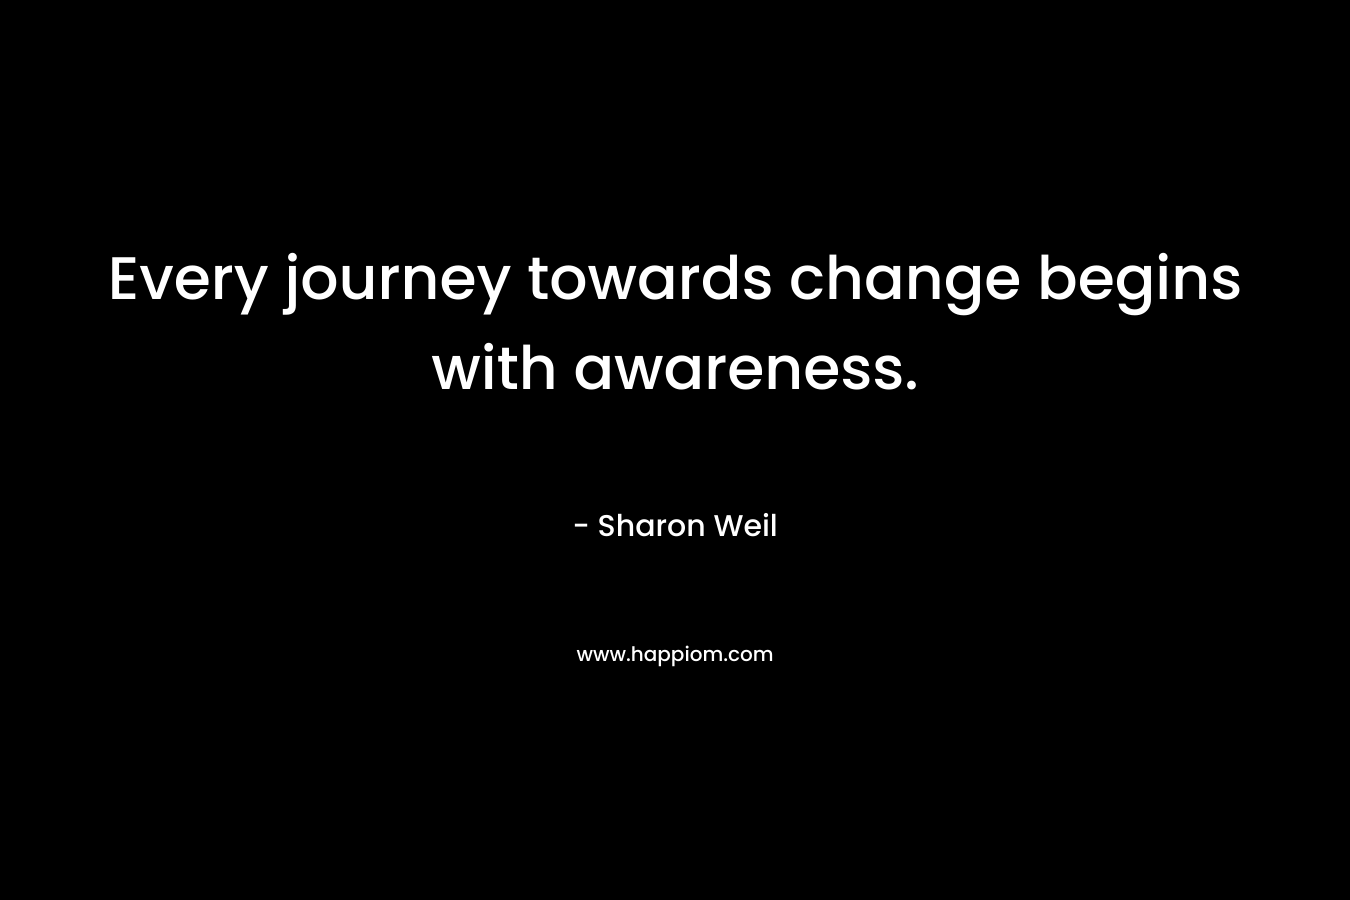 Every journey towards change begins with awareness.